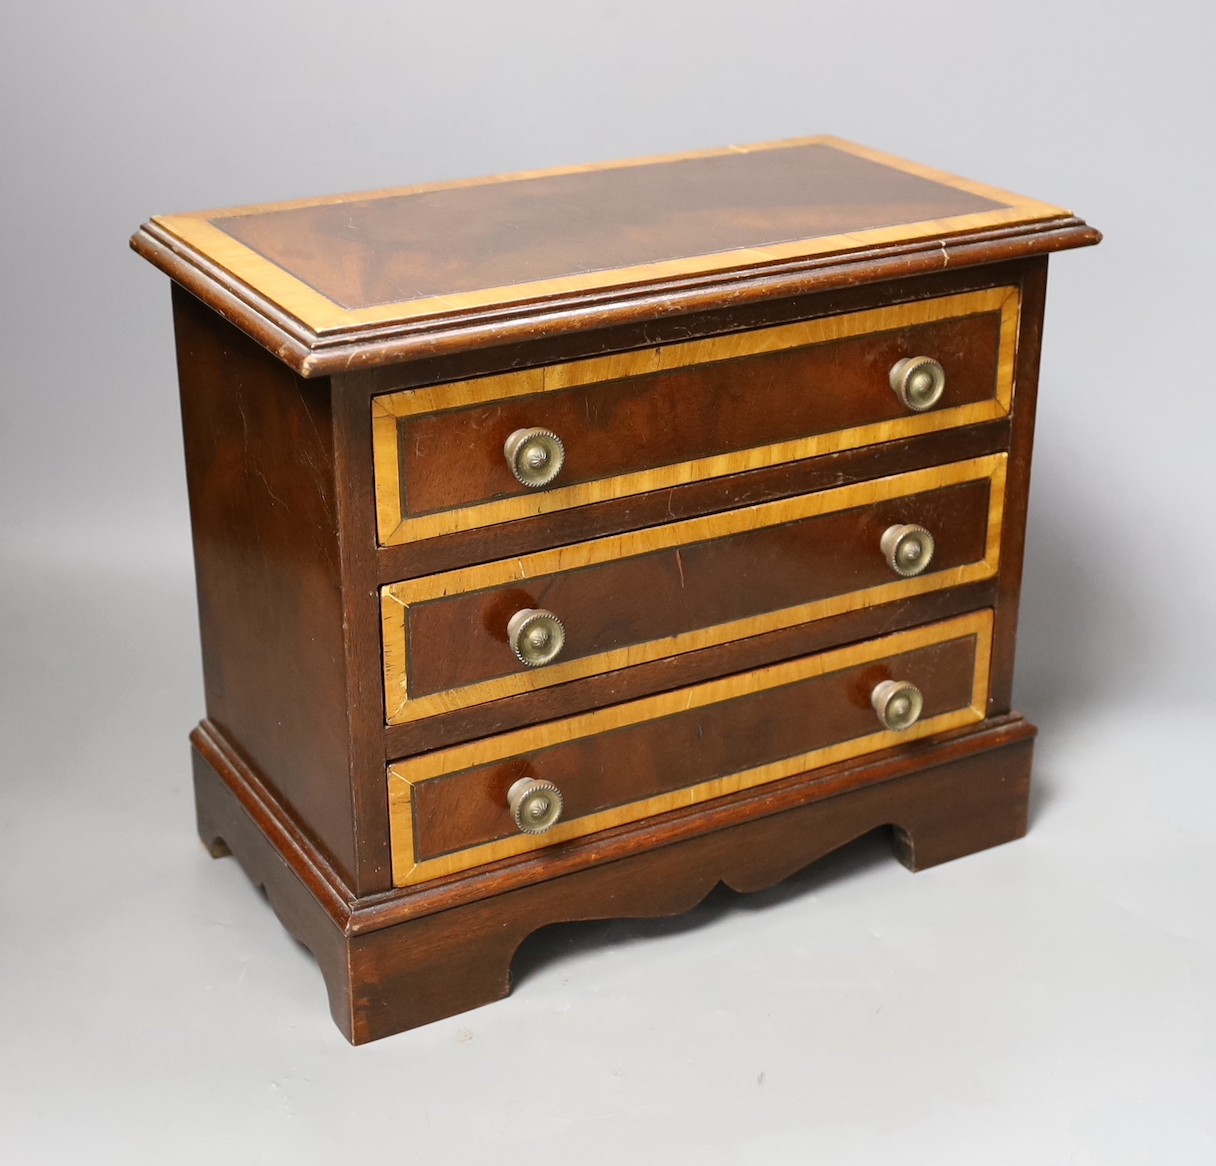 A miniature inlaid mahogany chest, 29cms wide x 25.5 cms high